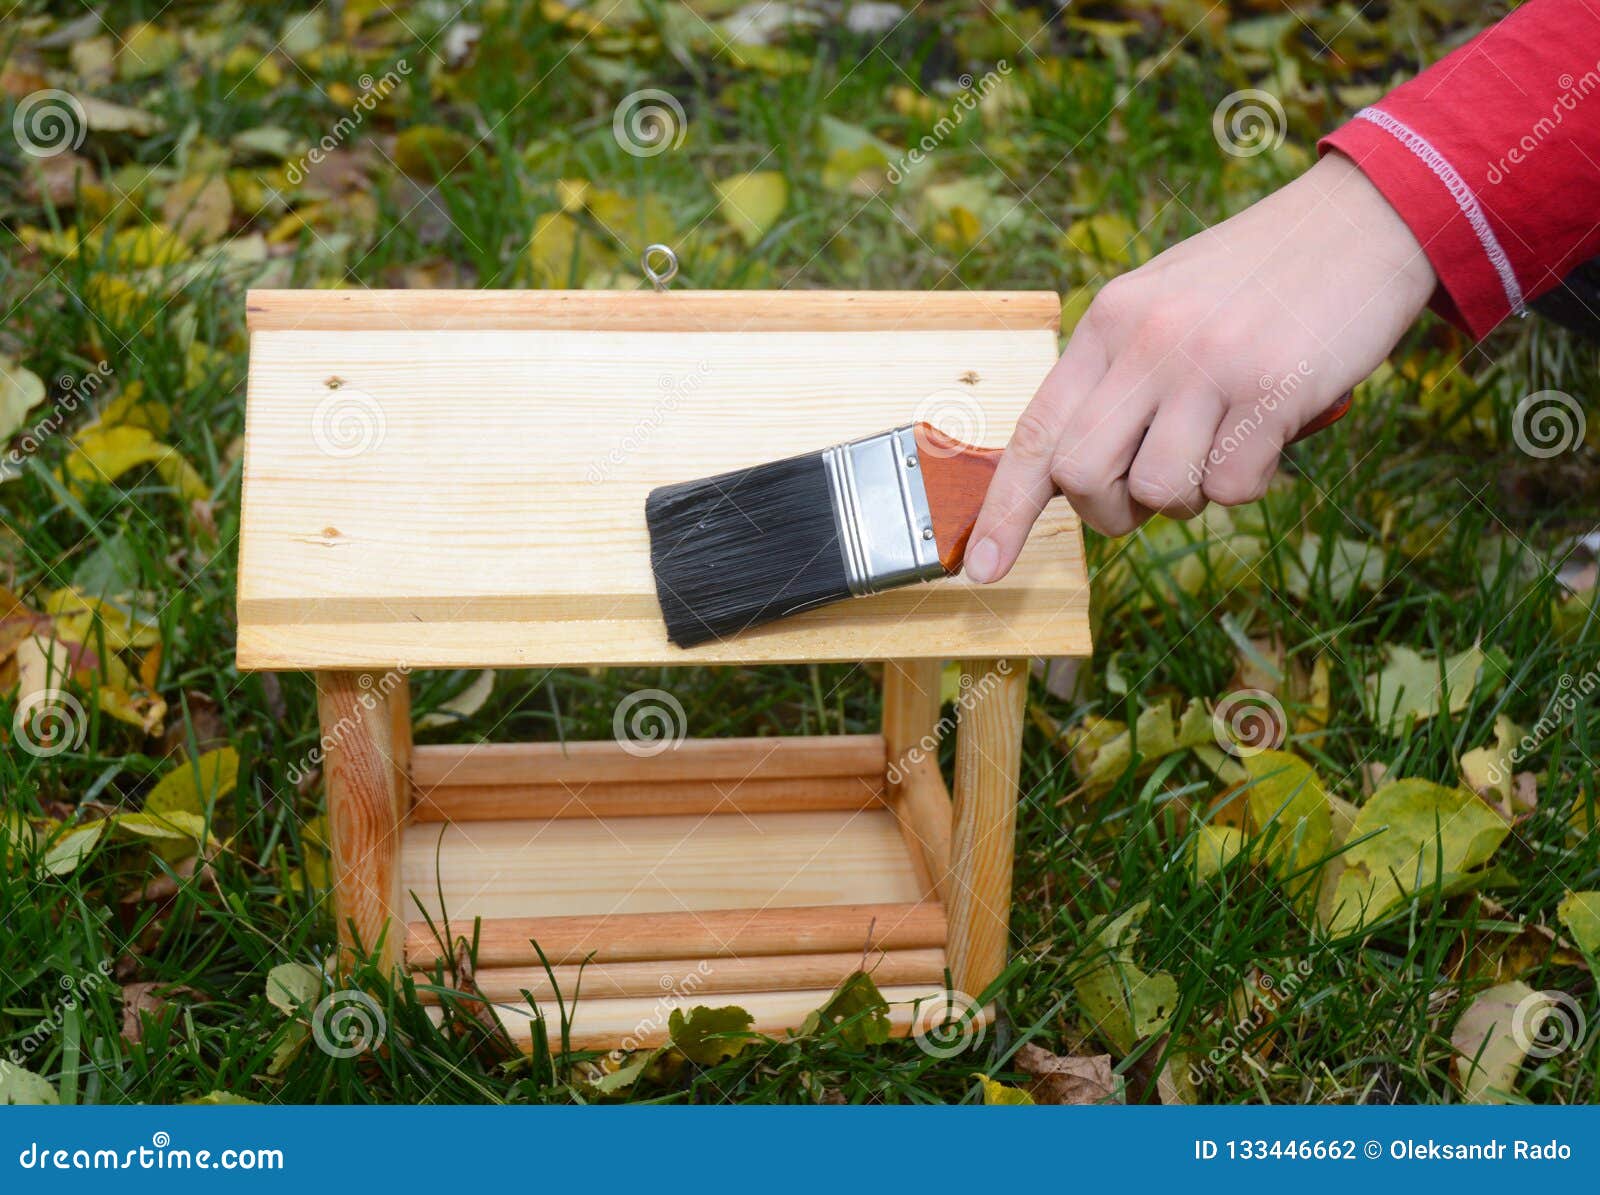 Painting Wooden Bird Feeder With Drying Oil For Rain Protection. Stock Photo Image of